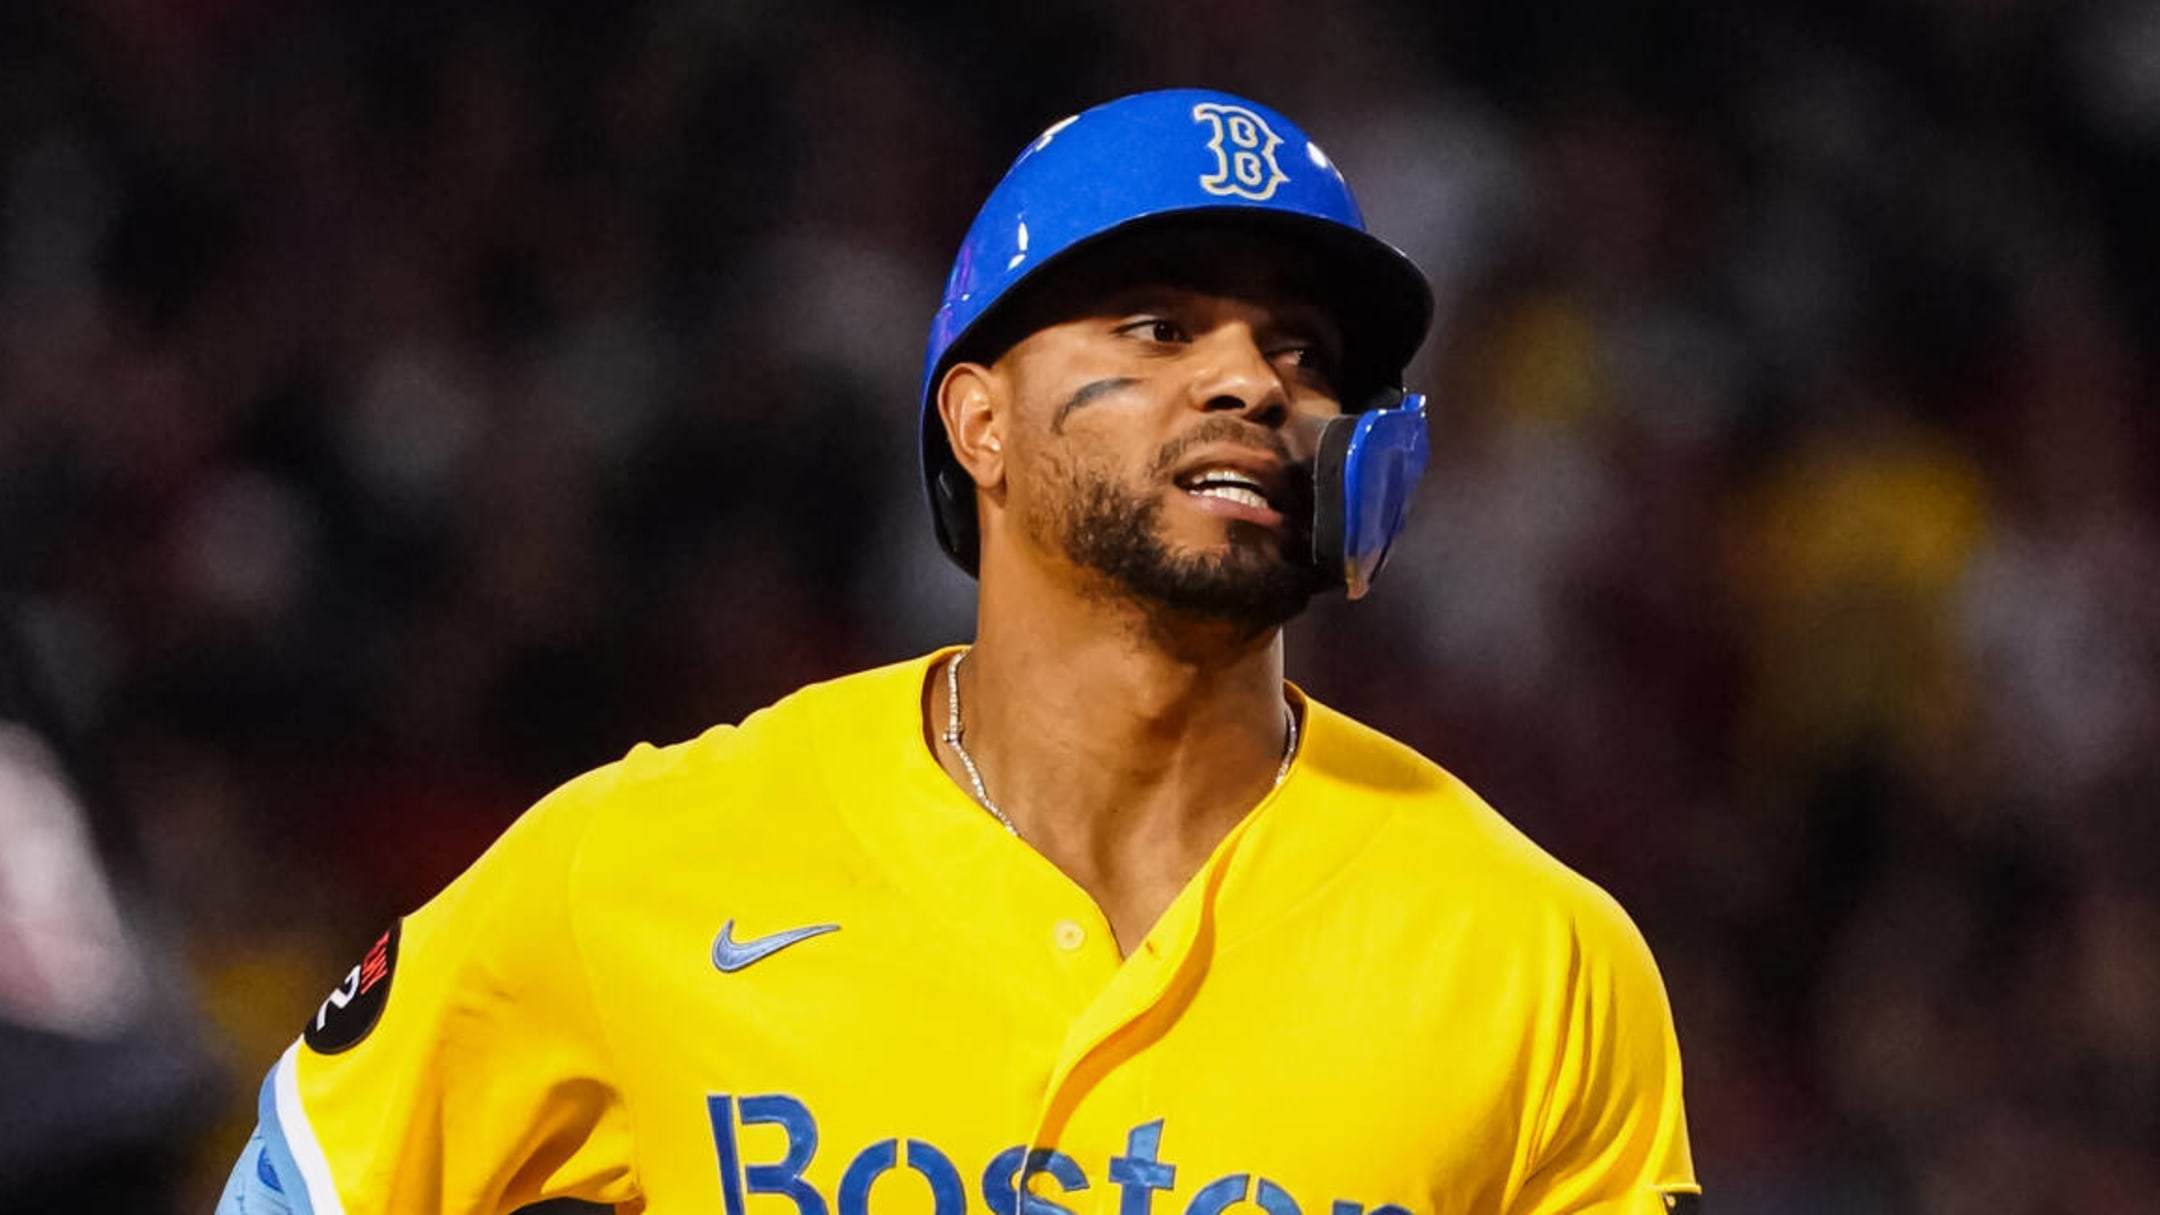 Report: Red Sox have told Xander Bogaerts he's staying in Boston